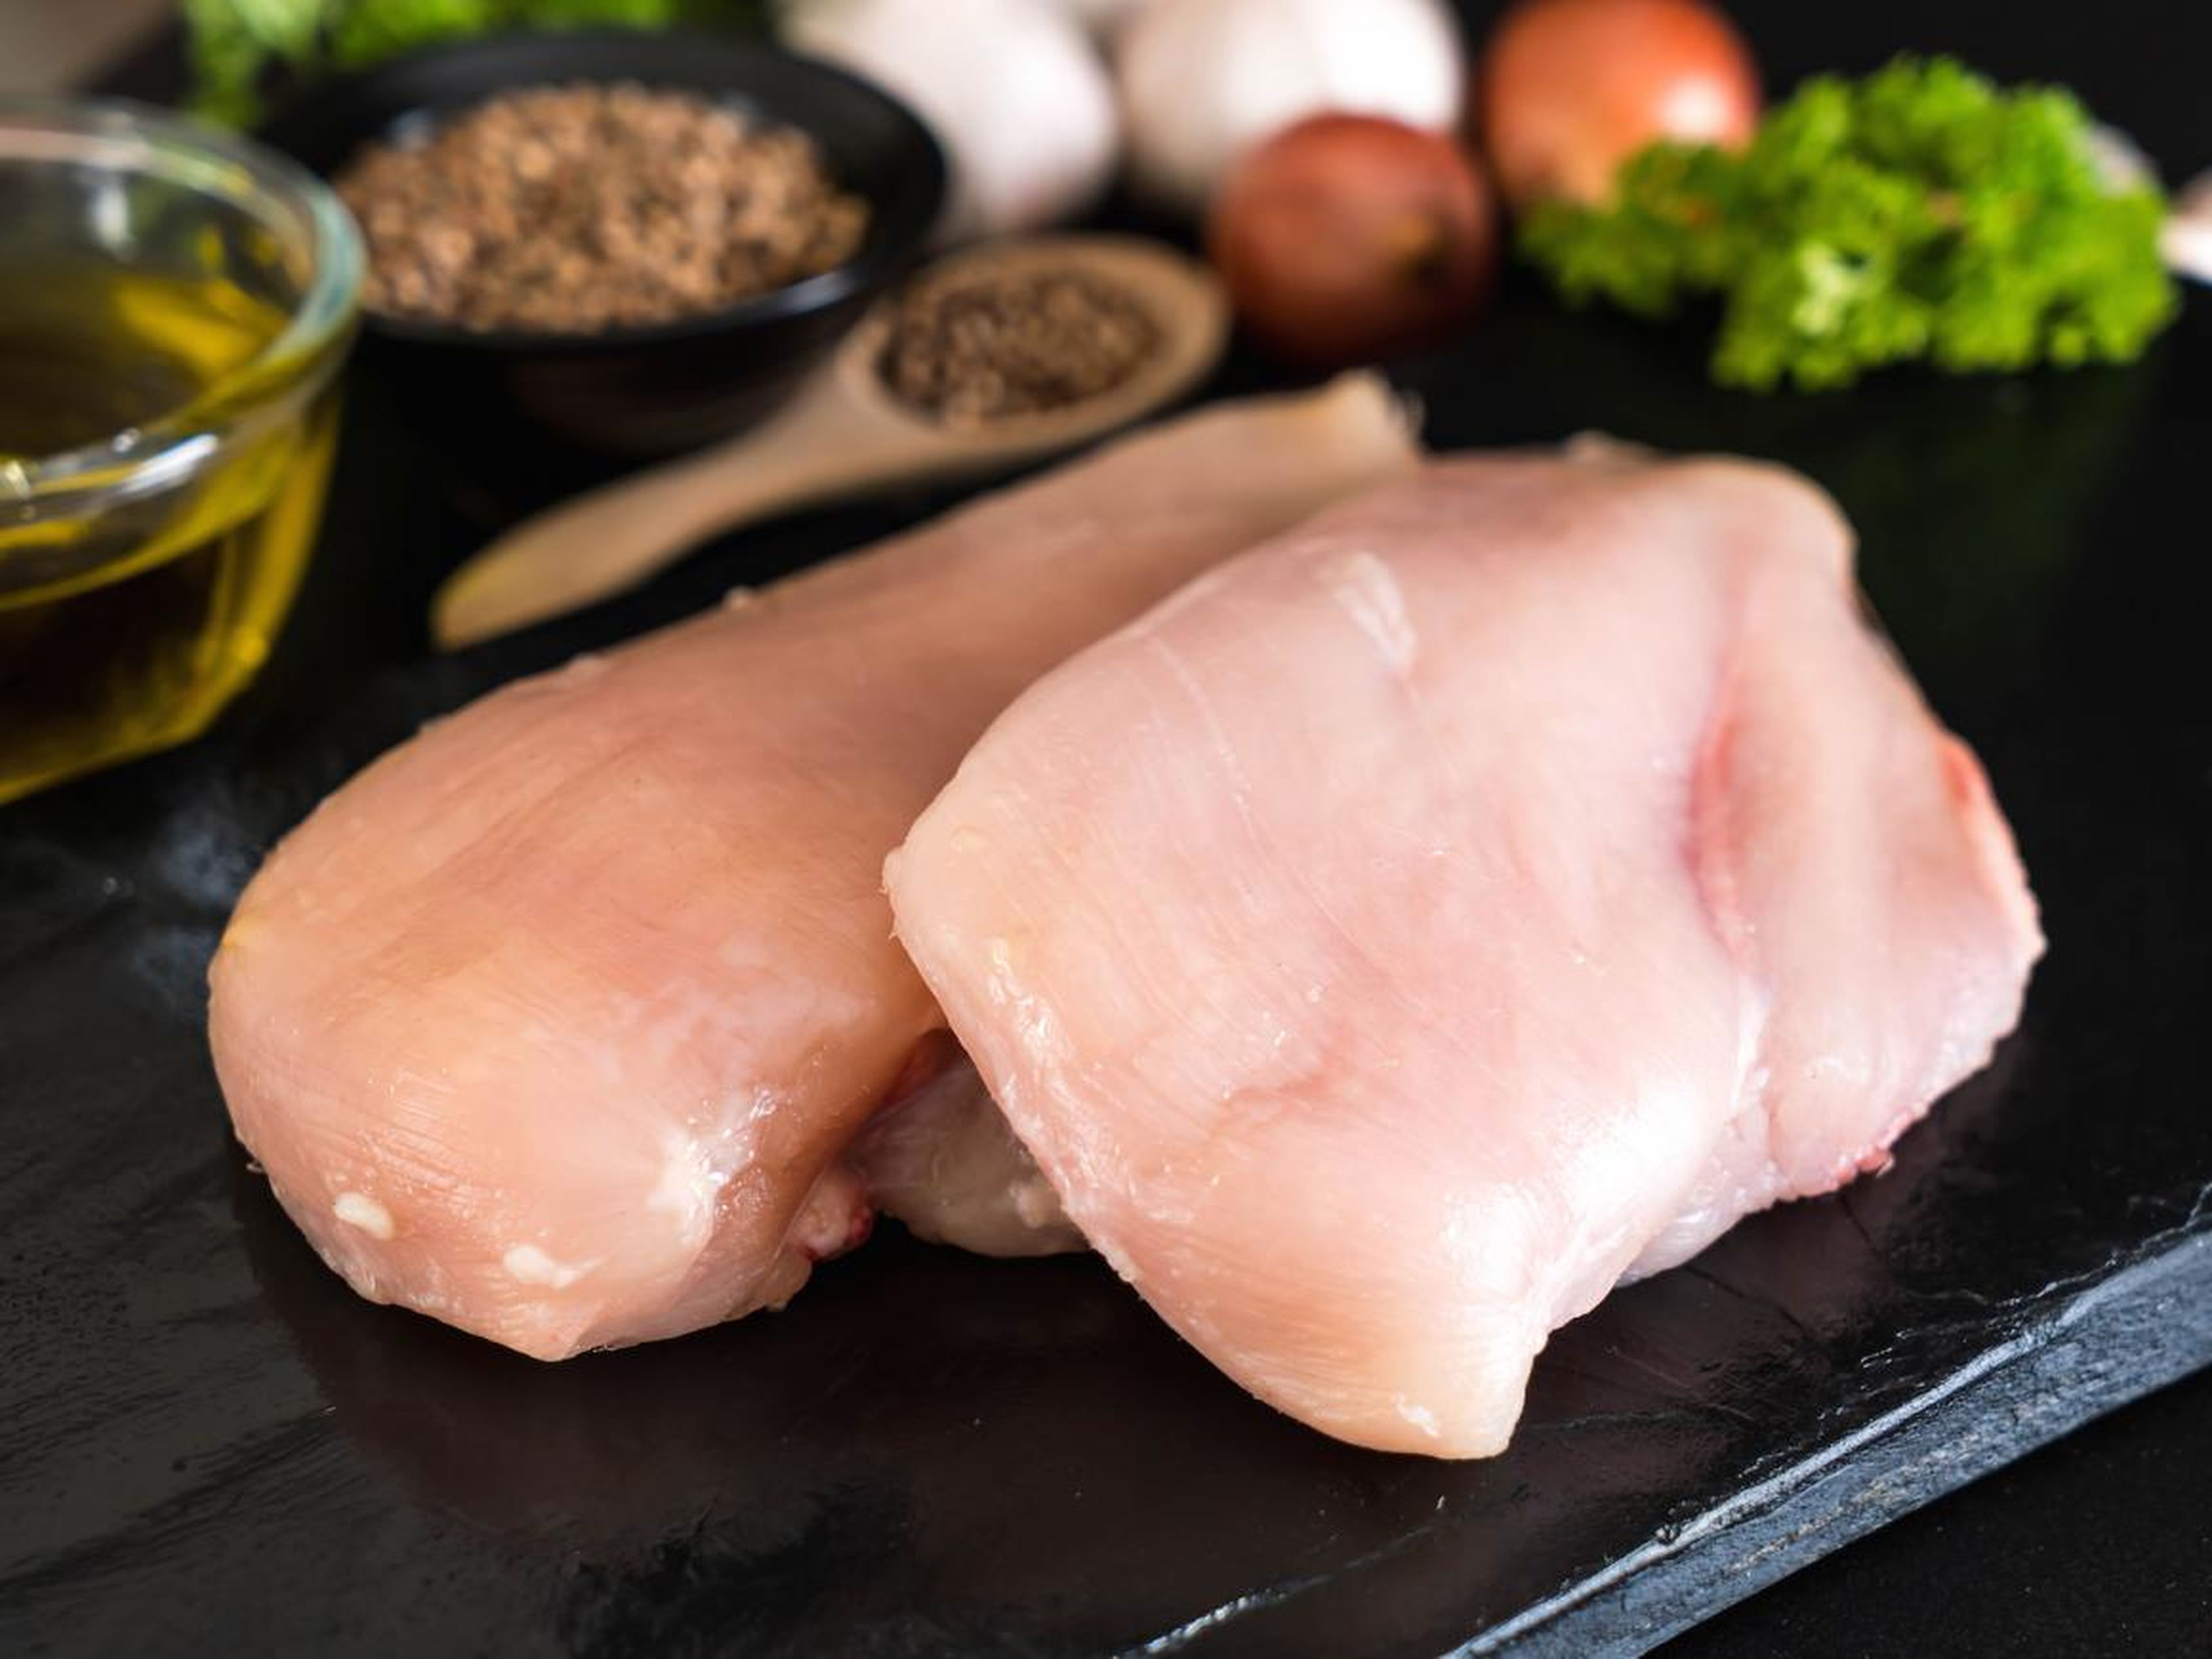 To avoid dry chicken, use a pan instead of a microwave.